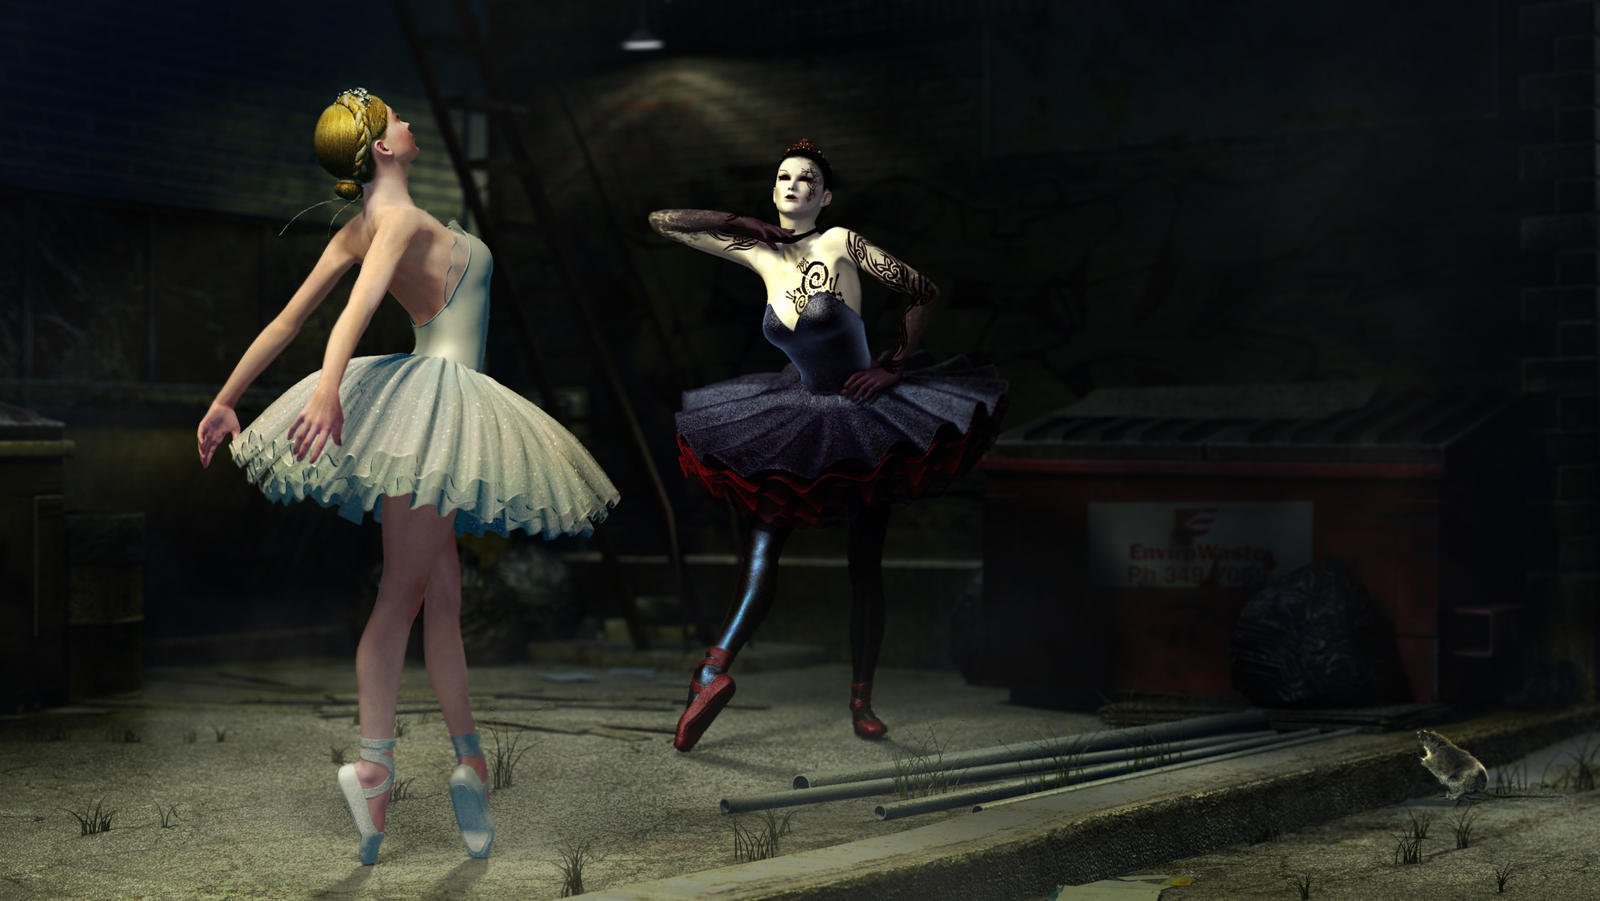 There's a ballet being fought out in the alley